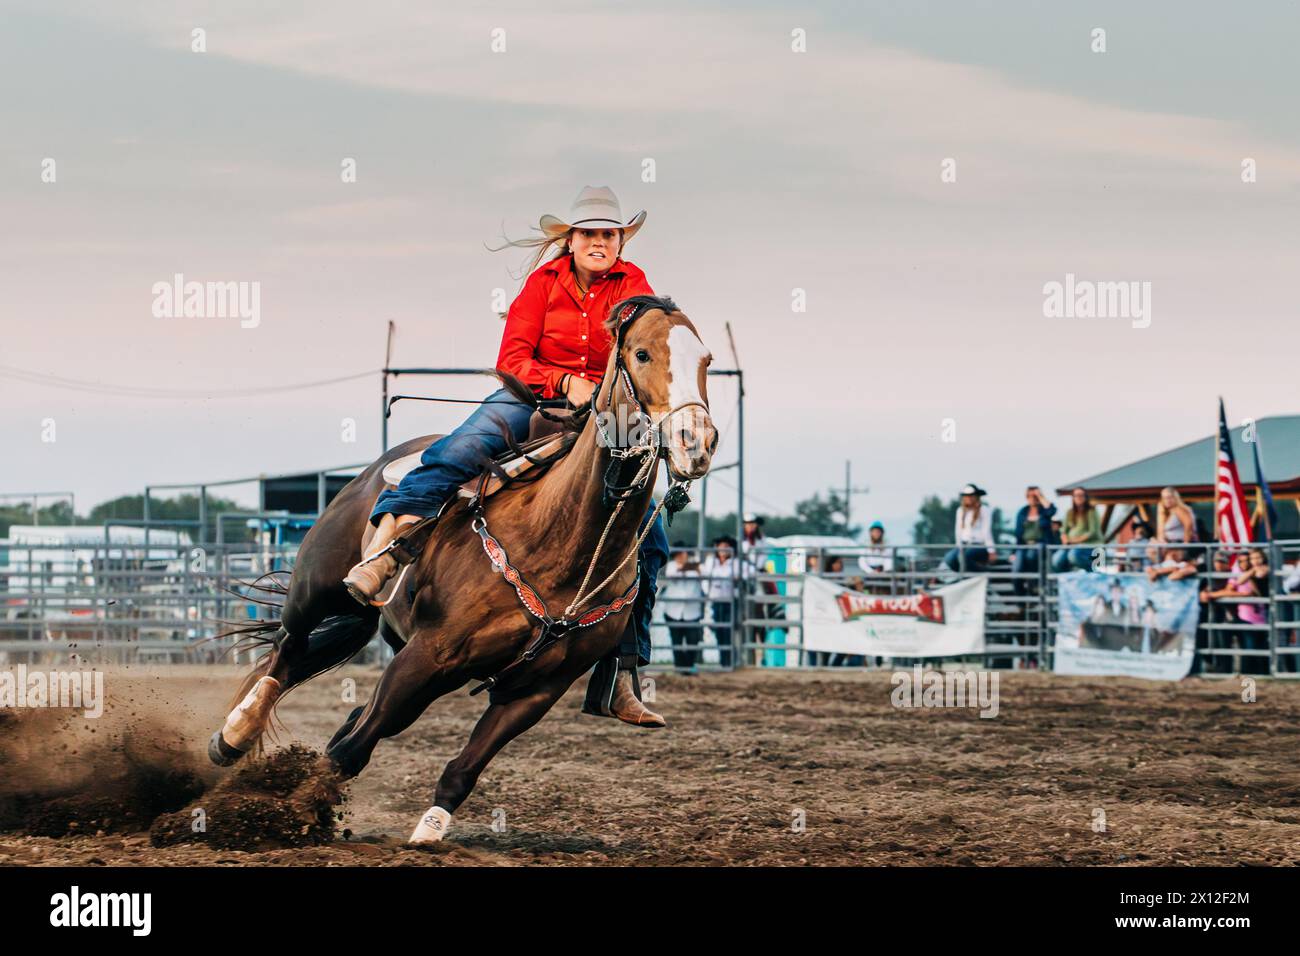 Cowgirl riding horse during barrel racing at county fair rodeo Stock Photo